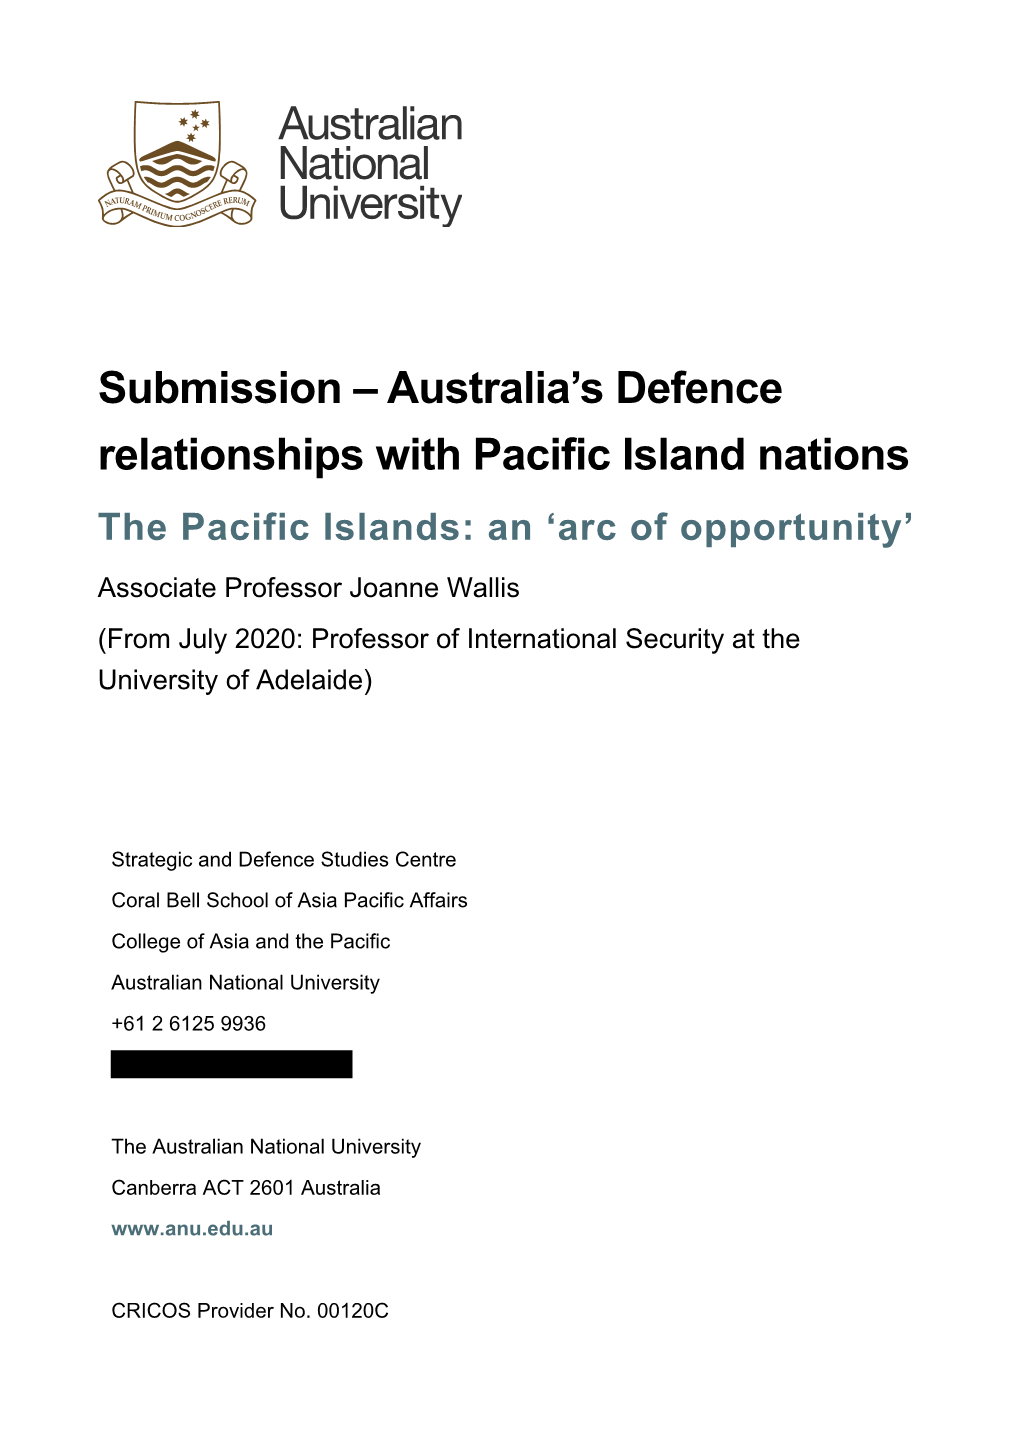 Australia's Defence Relationships with Pacific Island Nations